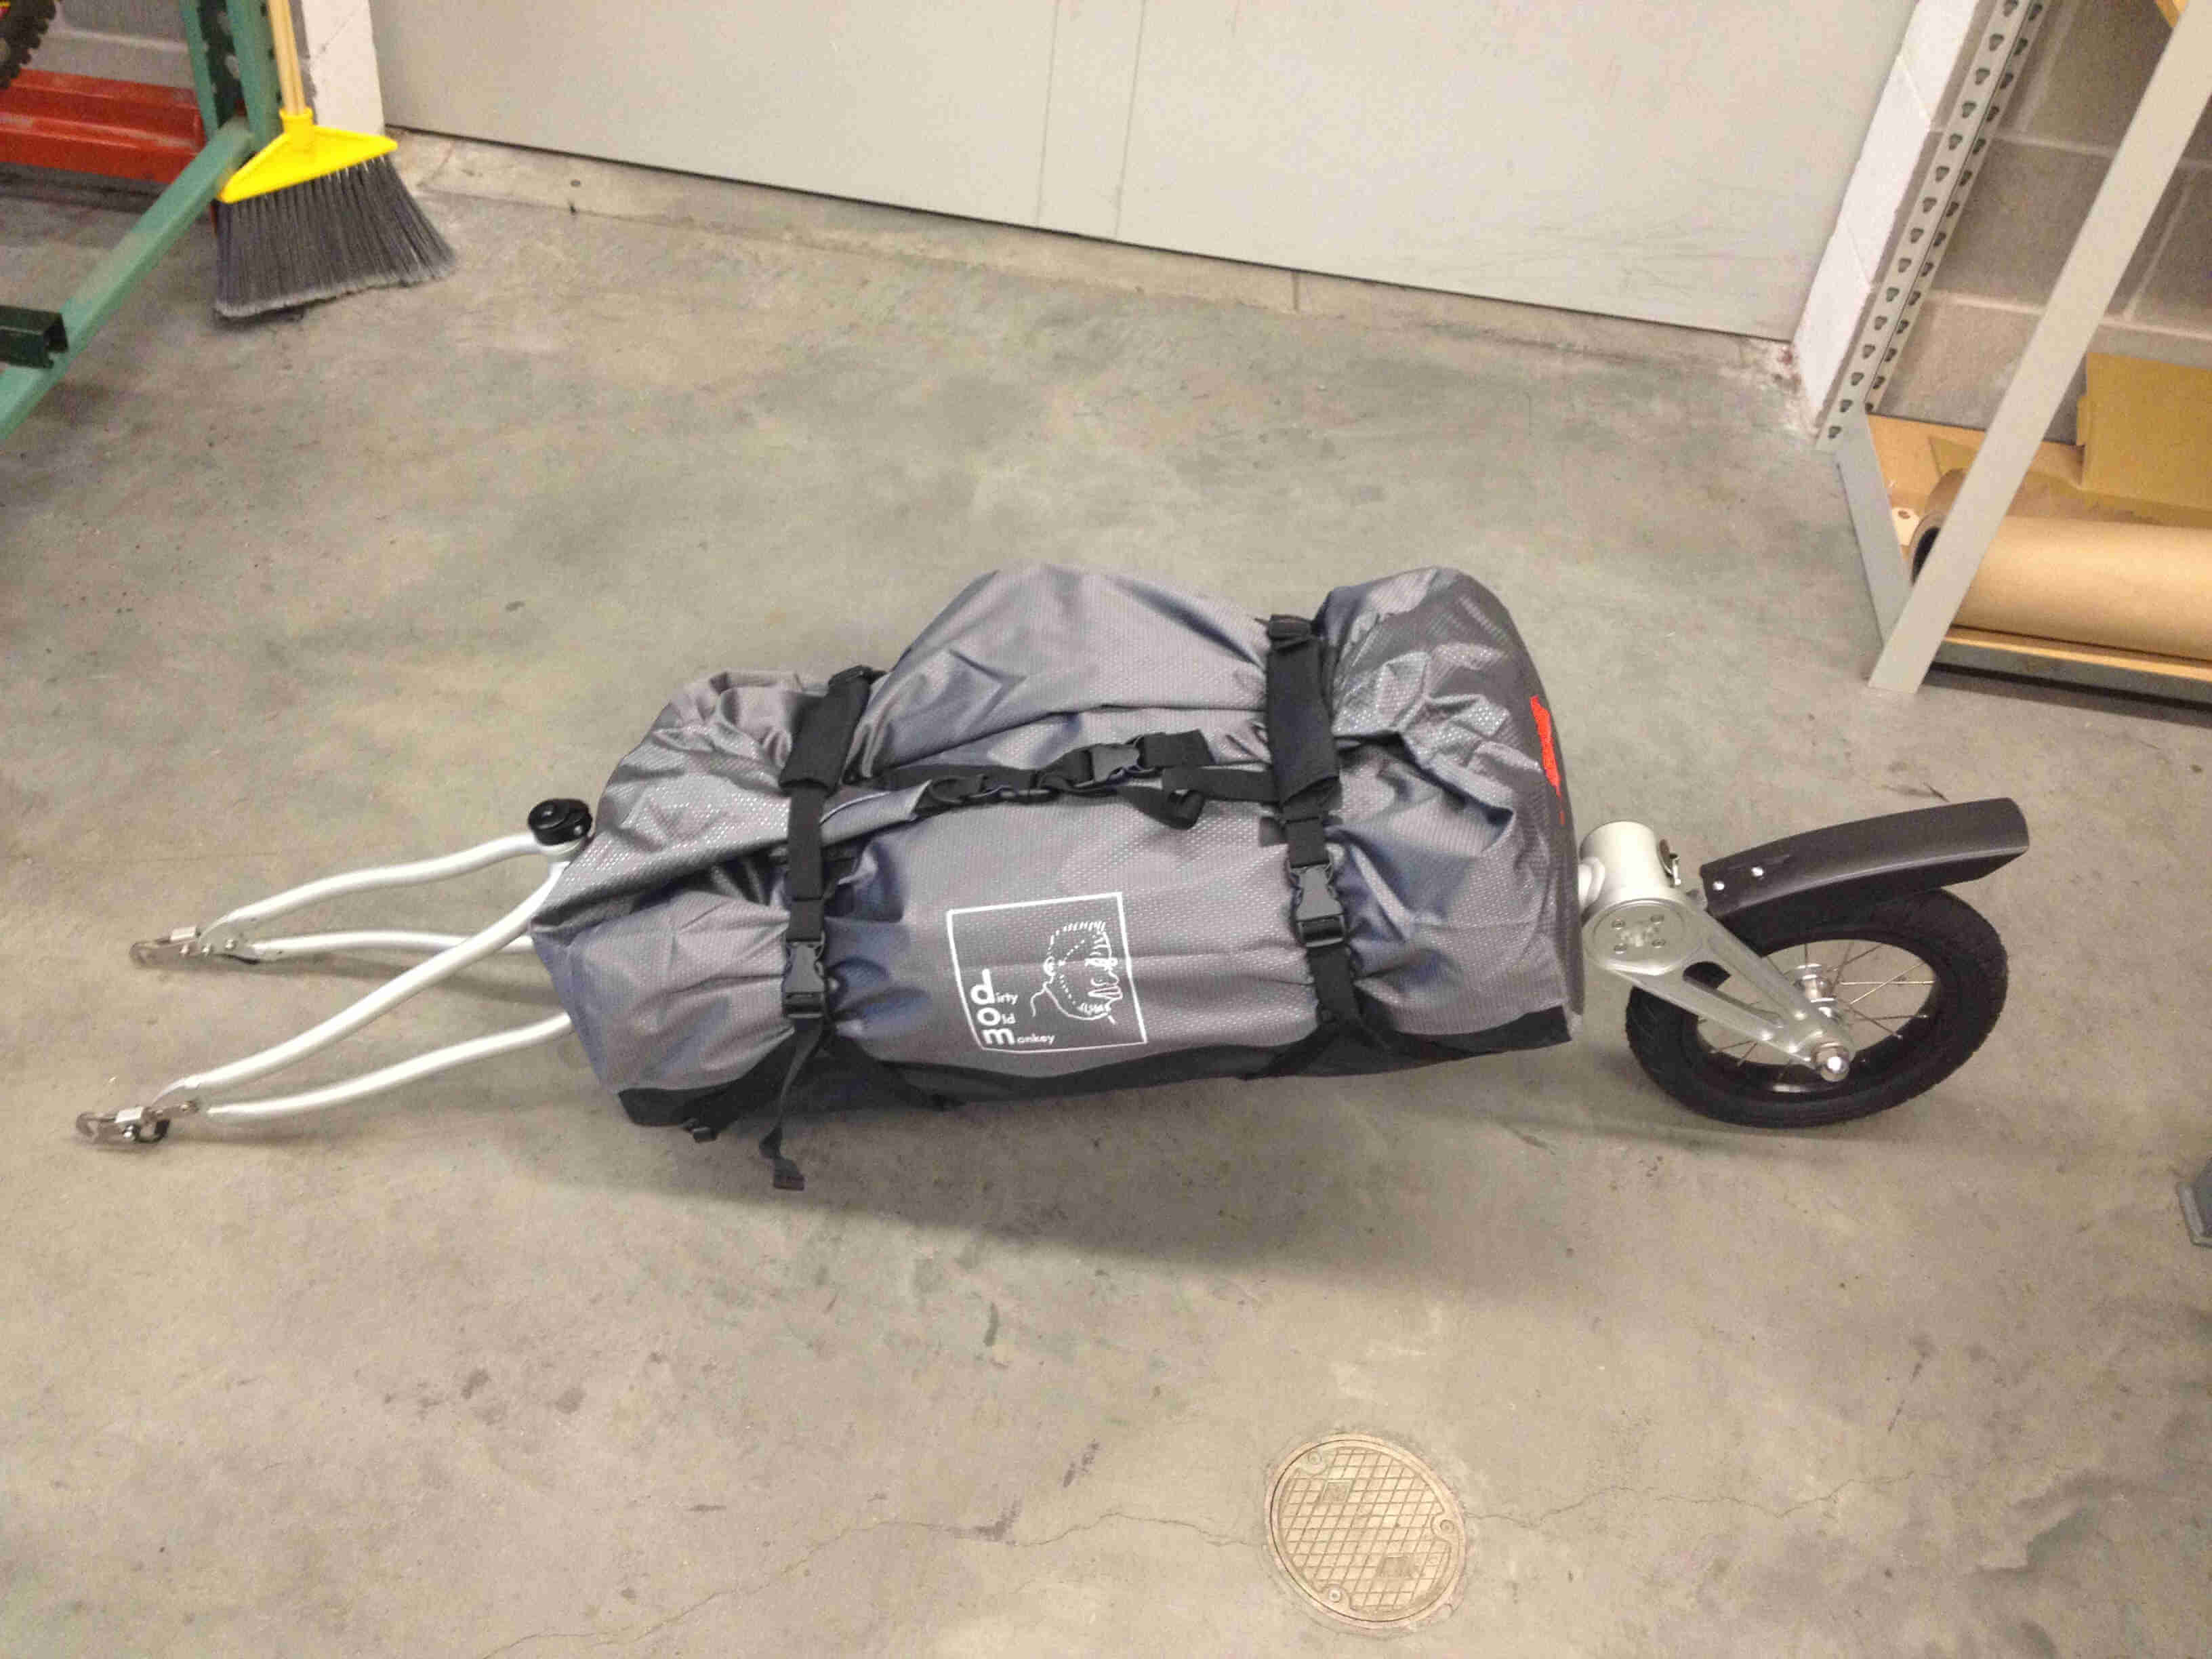 Downward, left side view of a foldable bike trailer, with a gray dry bag strapped to it, on a cement floor